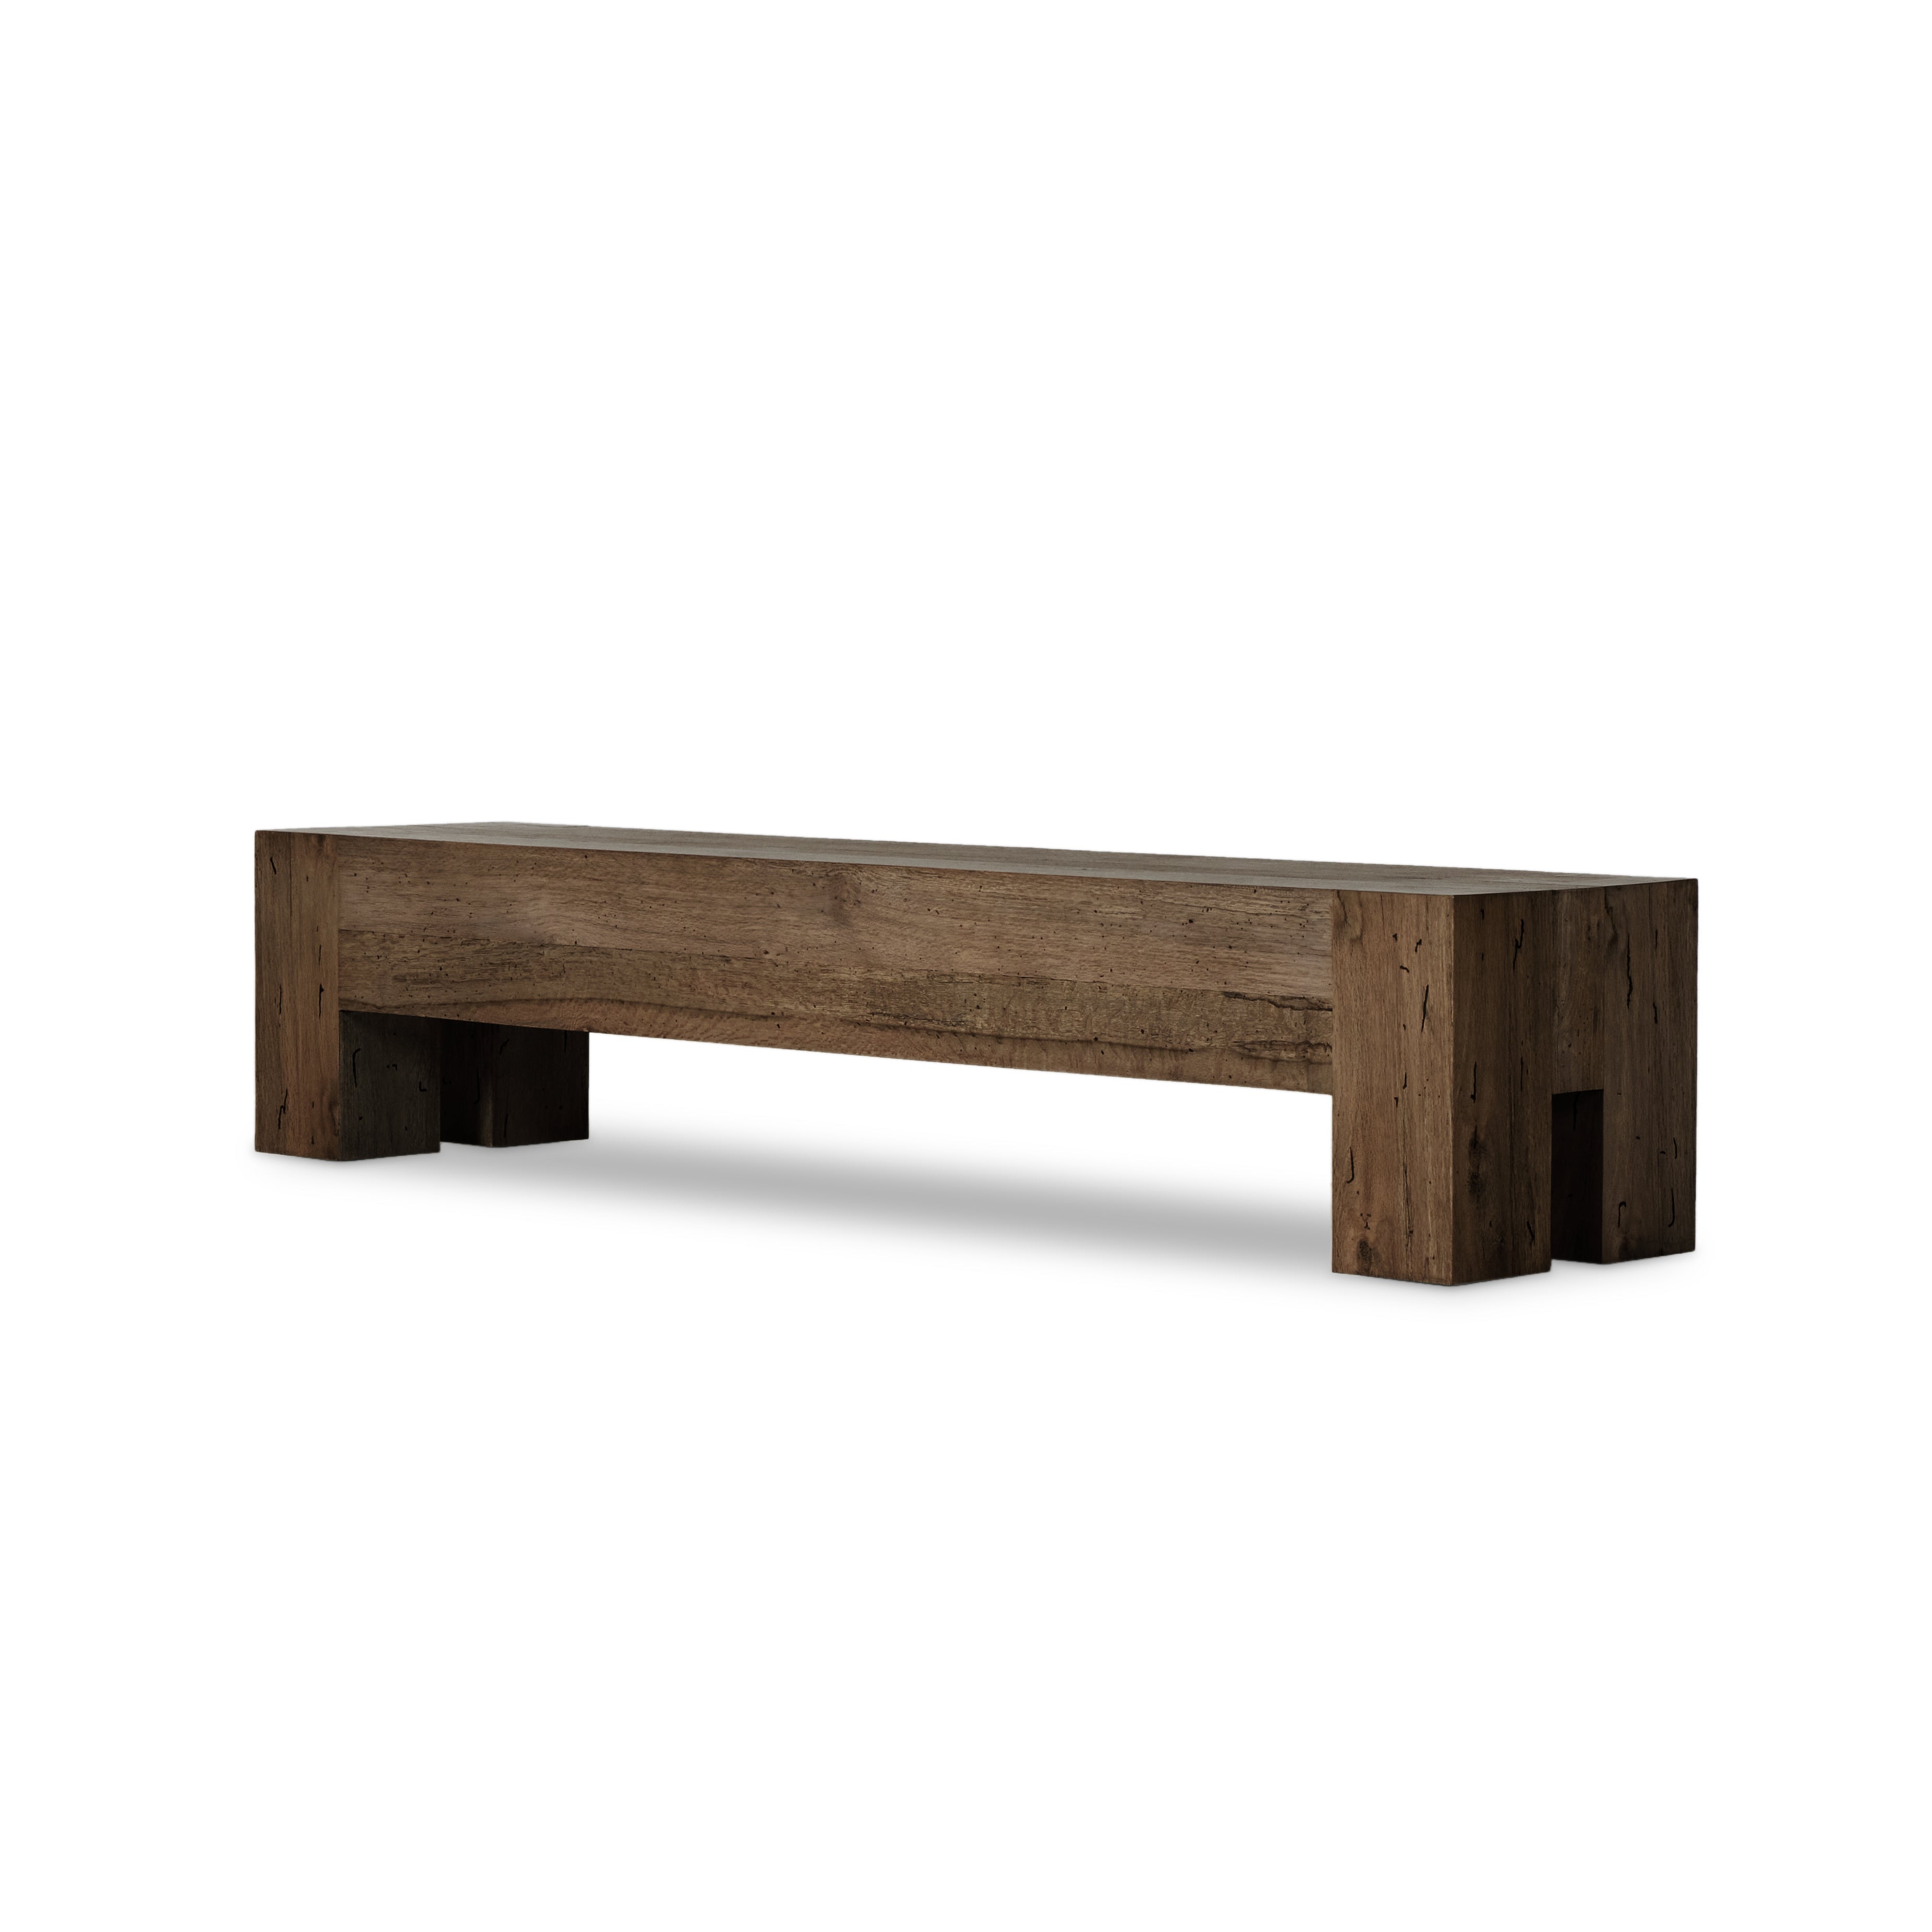 Alexandra Large Accent Bench